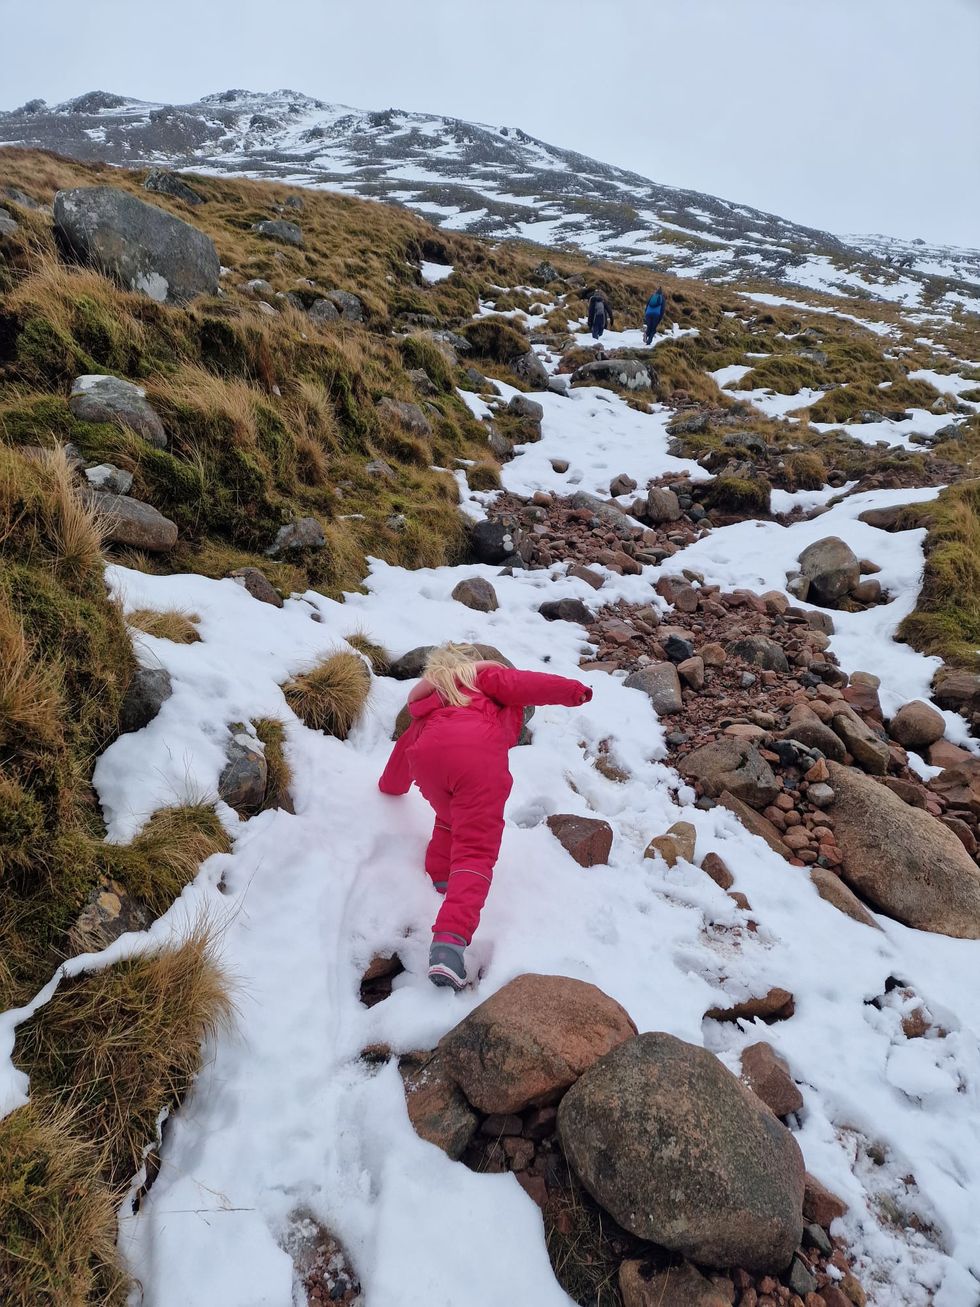 Undettered by snow, Seren climbed up all three mountains in a bid to raise money for Birmingham Children's Hospital. (Glyn Price/JustGiving)